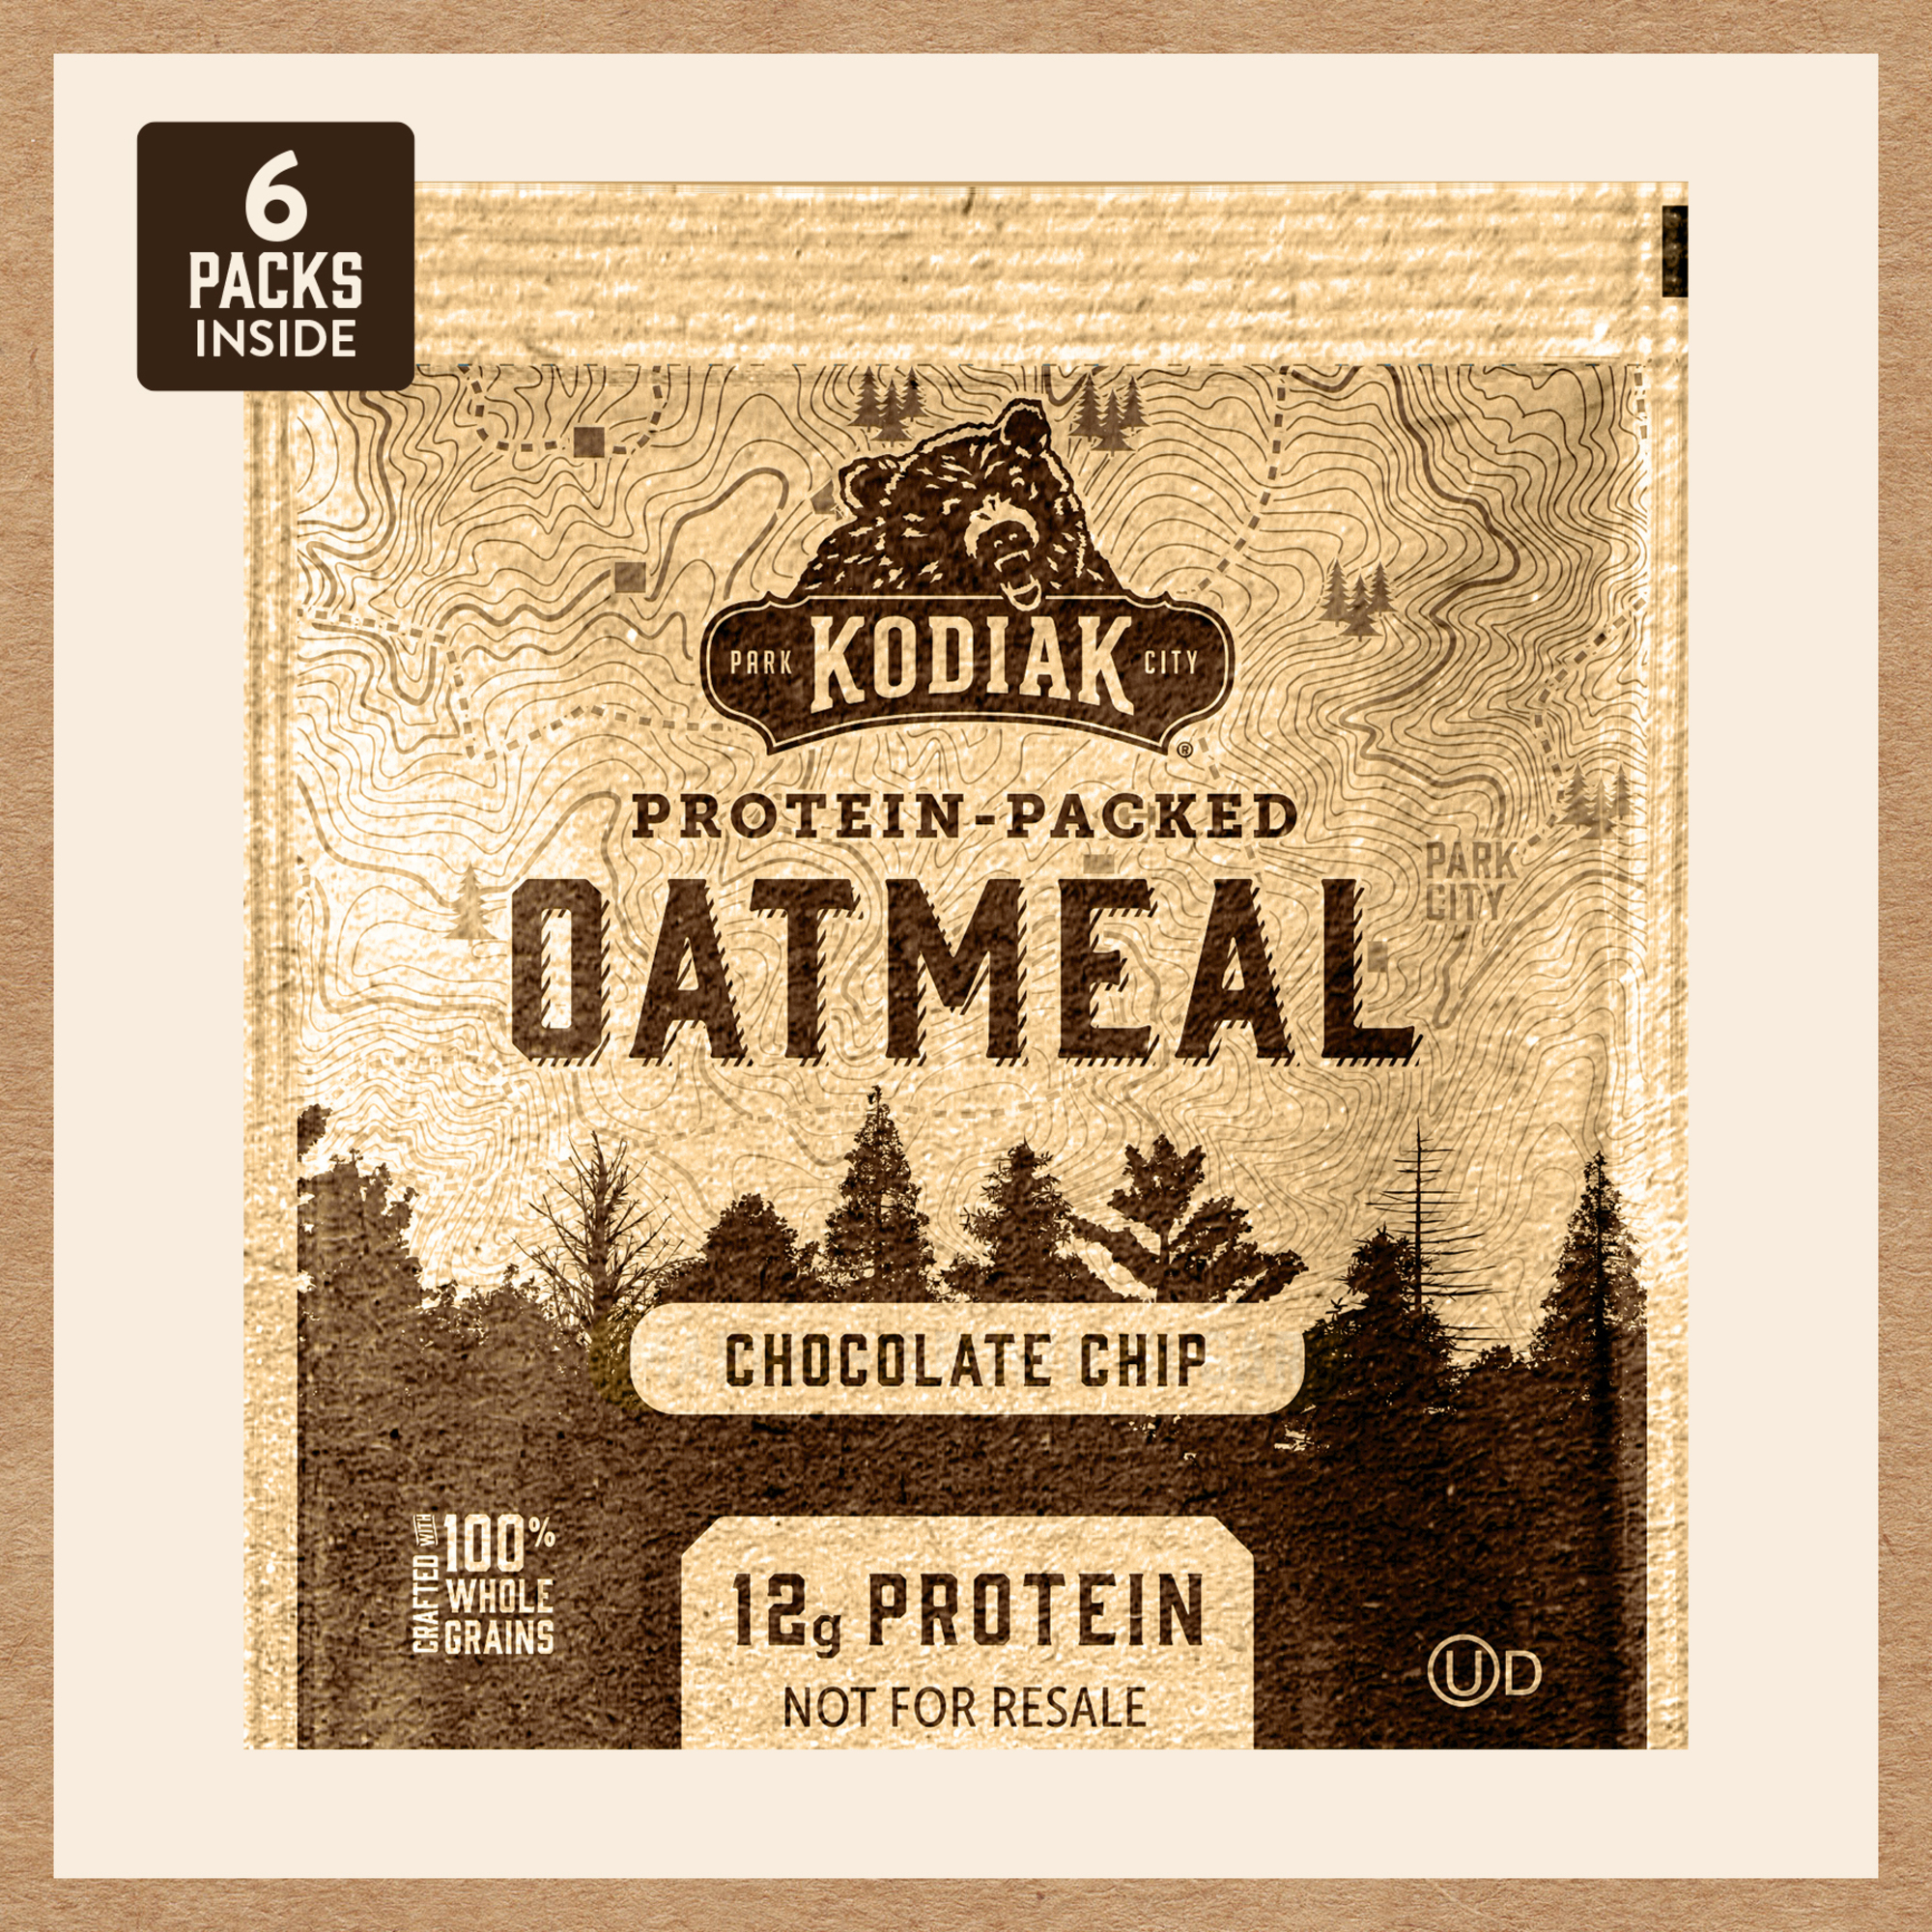 Kodiak Protein-Packed Chocolate Chip Instant Oatmeal, 1.76 oz, 6 Packets - image 3 of 9